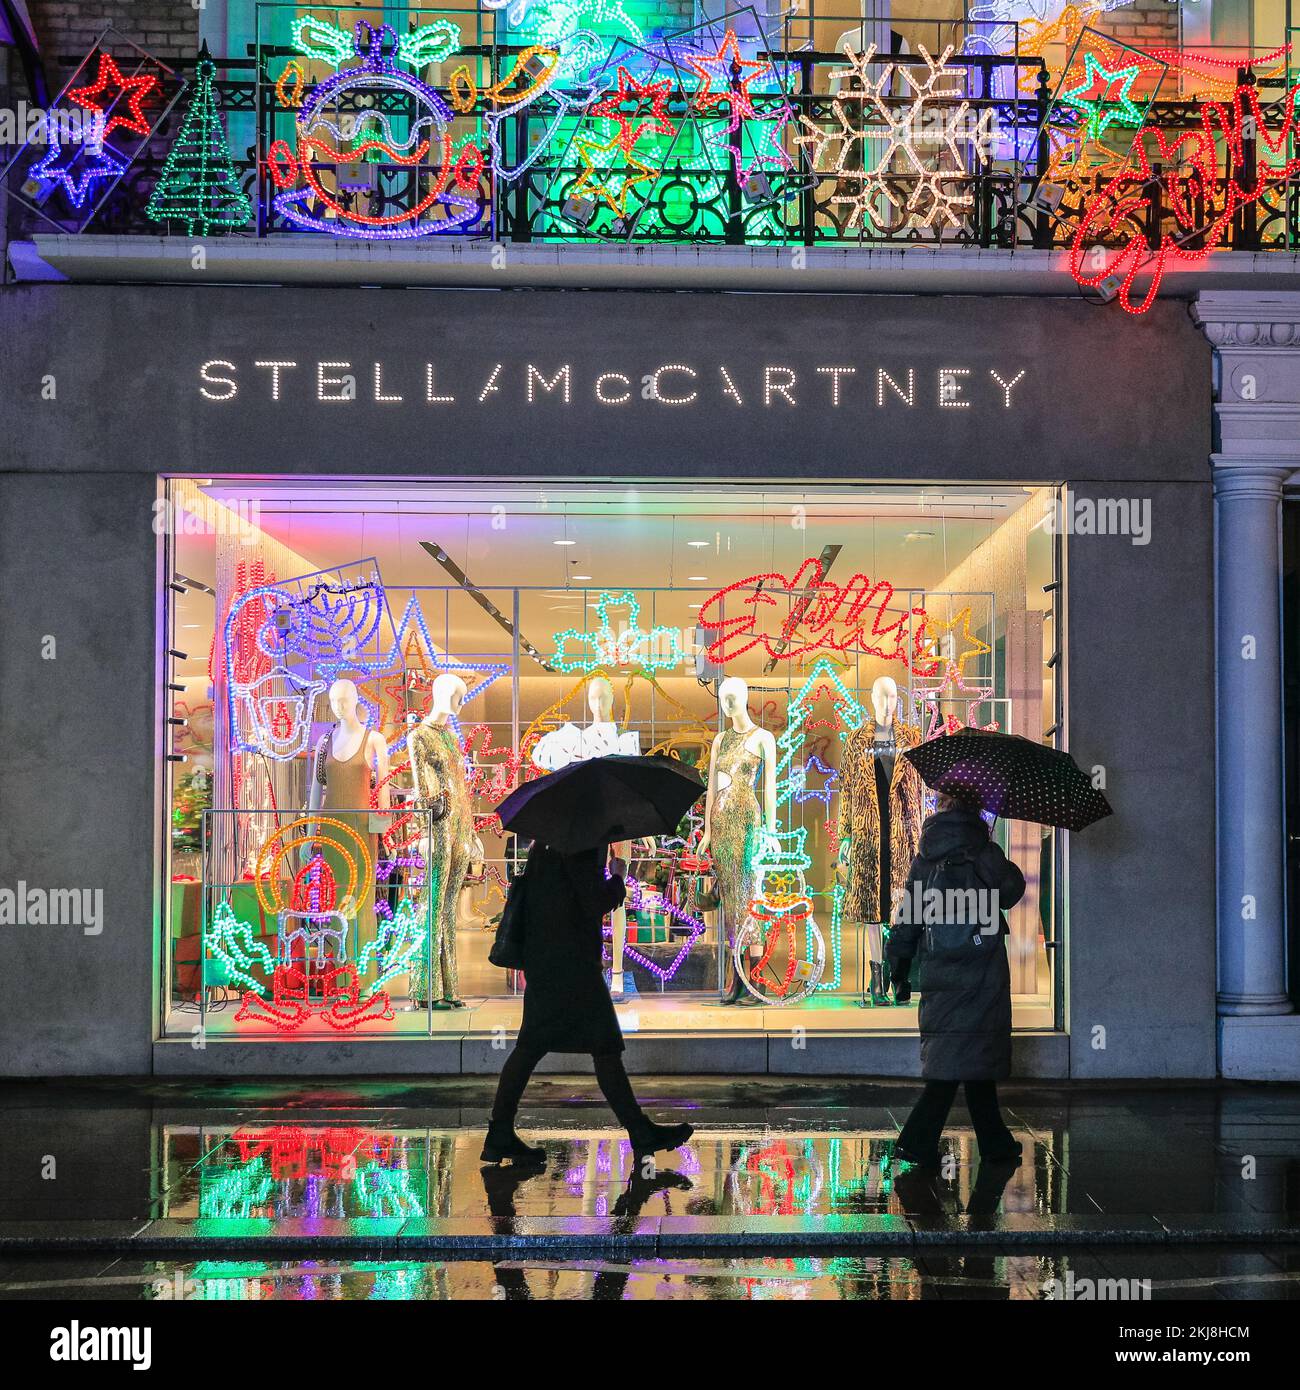 London, UK. 24th Nov, 2022. Colourful window displays at the Louis Vuitton  store. People in Bond Street, Mayfair's famous shopping street, and along  Piccadilly browse shop windows and admire the many colourful